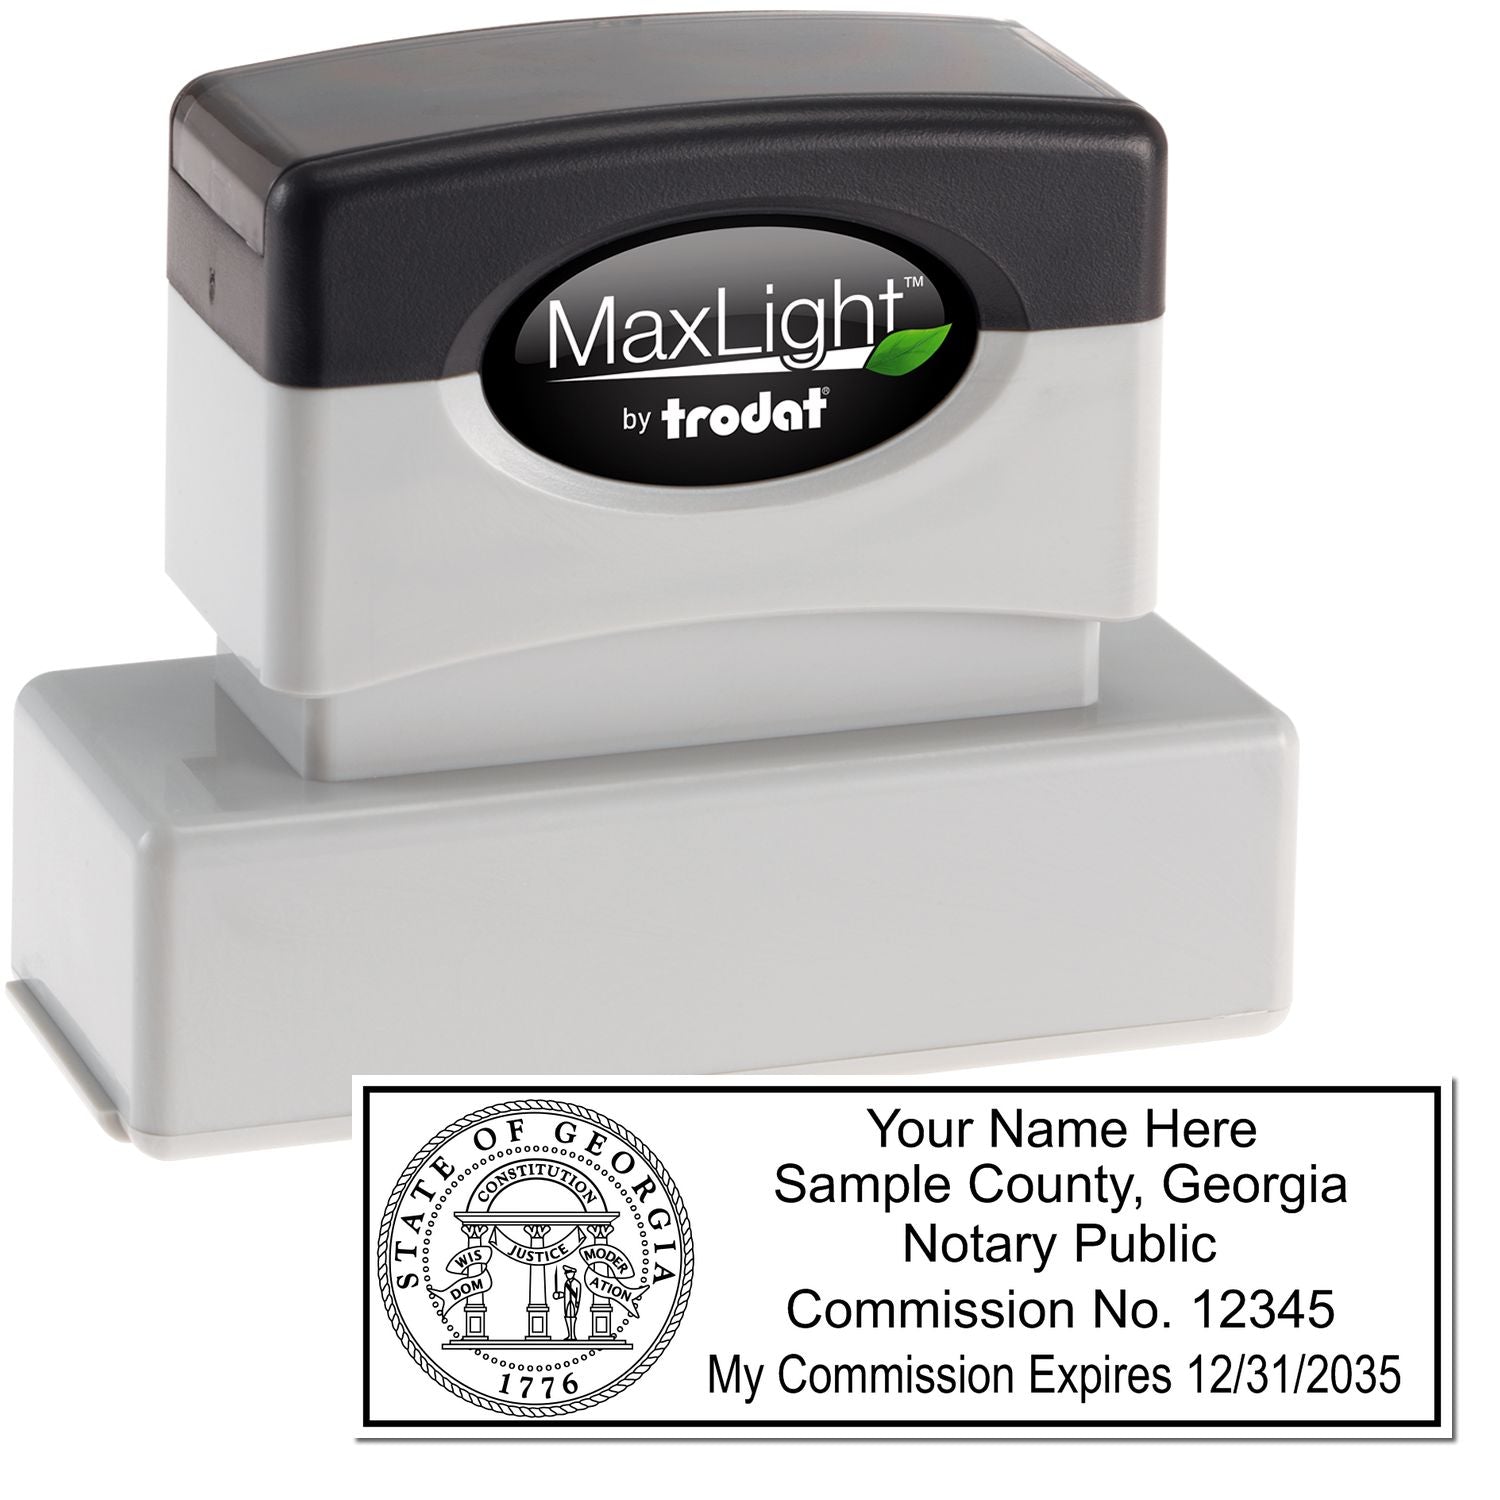 The main image for the MaxLight Premium Pre-Inked Georgia Rectangular Notarial Stamp depicting a sample of the imprint and electronic files